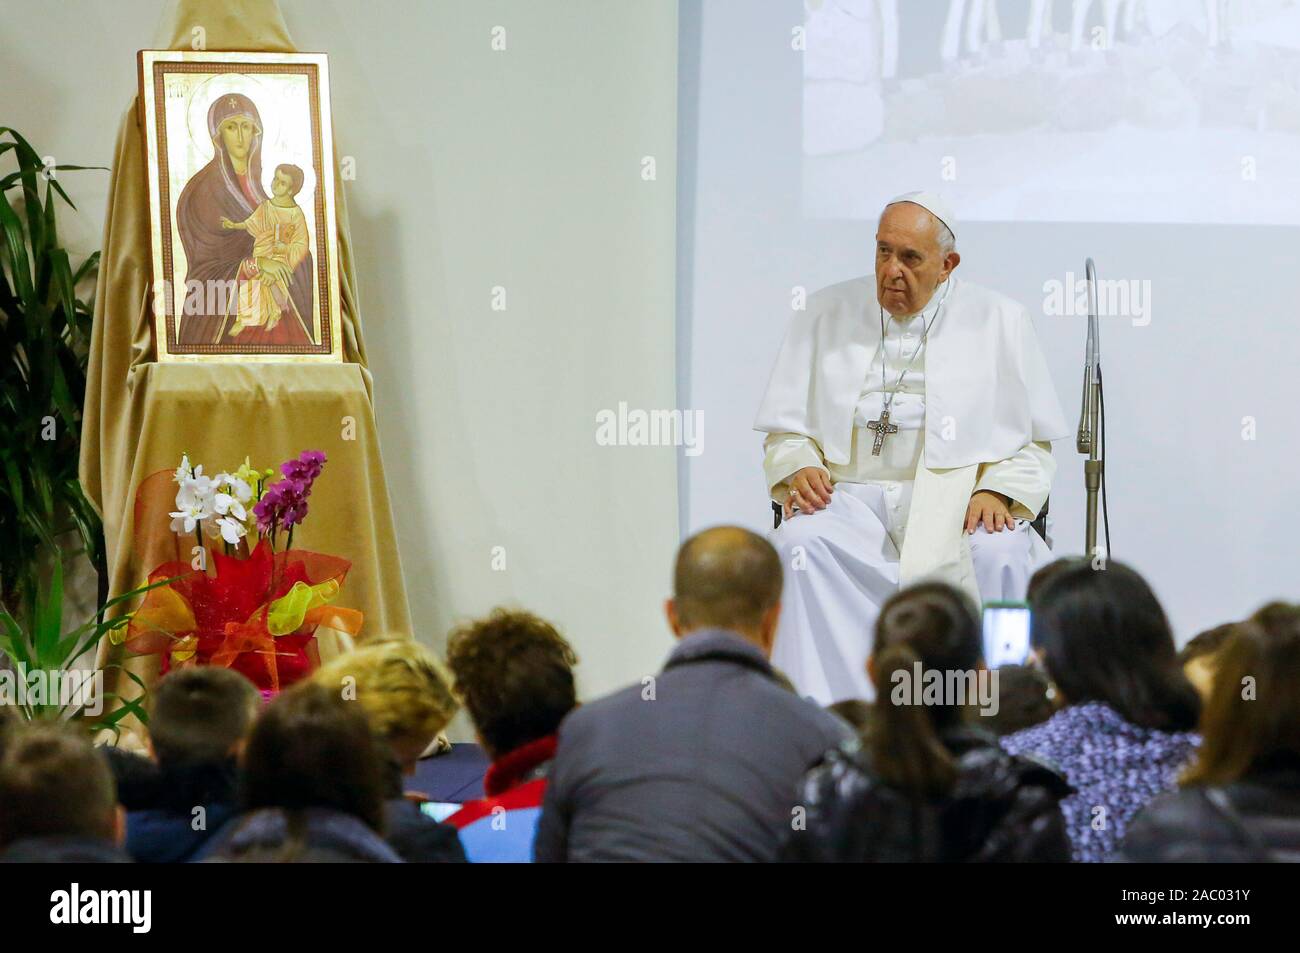 Rome, Italy. 29th Nov, 2019. Pope Francis visits the Cittadella della Carita' (Citadel of Charity) on the occasion of the 40th anniversary of the establishment of Caritas charity organization in Rome. Credit: Riccardo De Luca Credit: Update Images/Alamy Live News Stock Photo